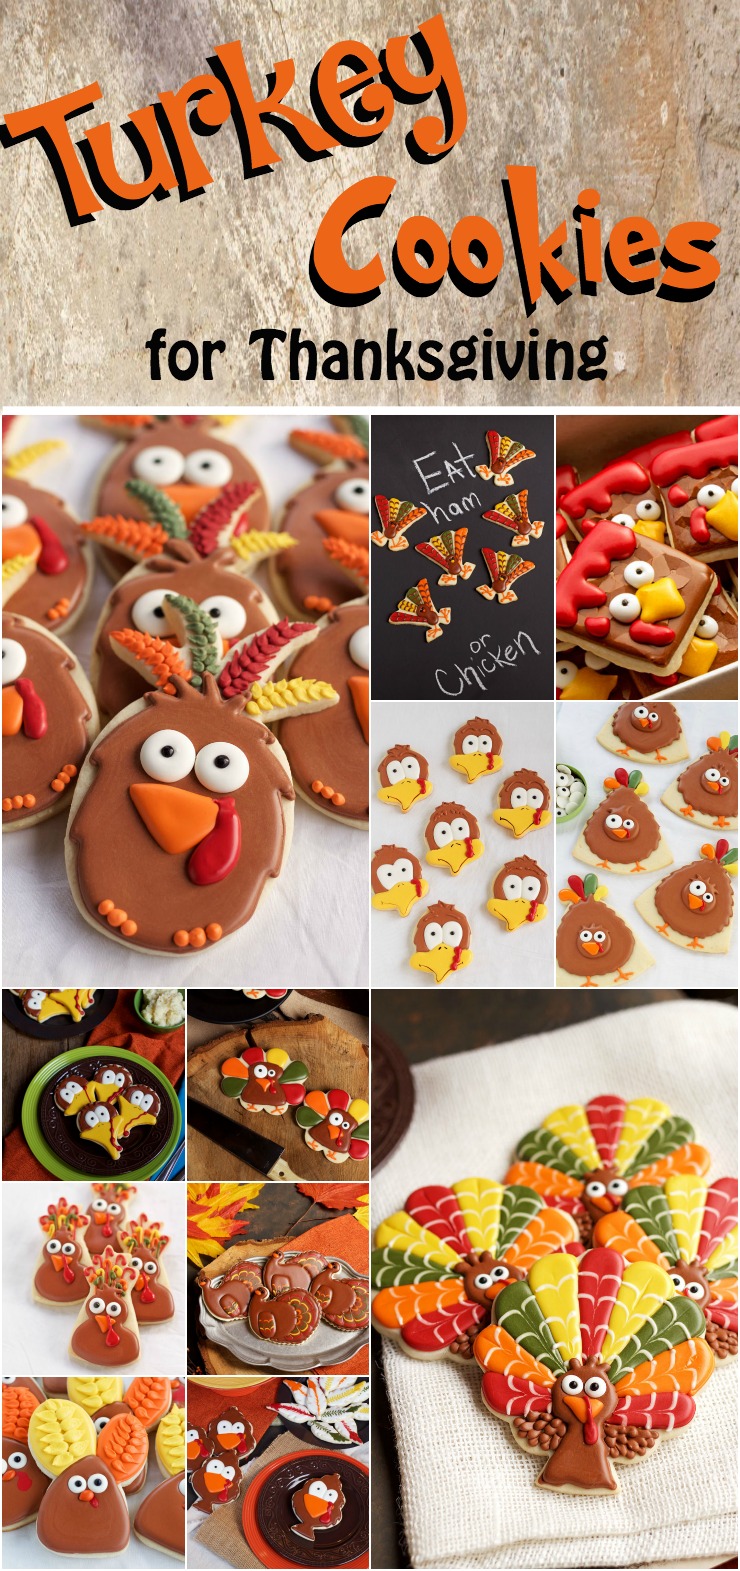 Over 12 Turkey Cookies for Thanksgiving | The Beafoot Baker